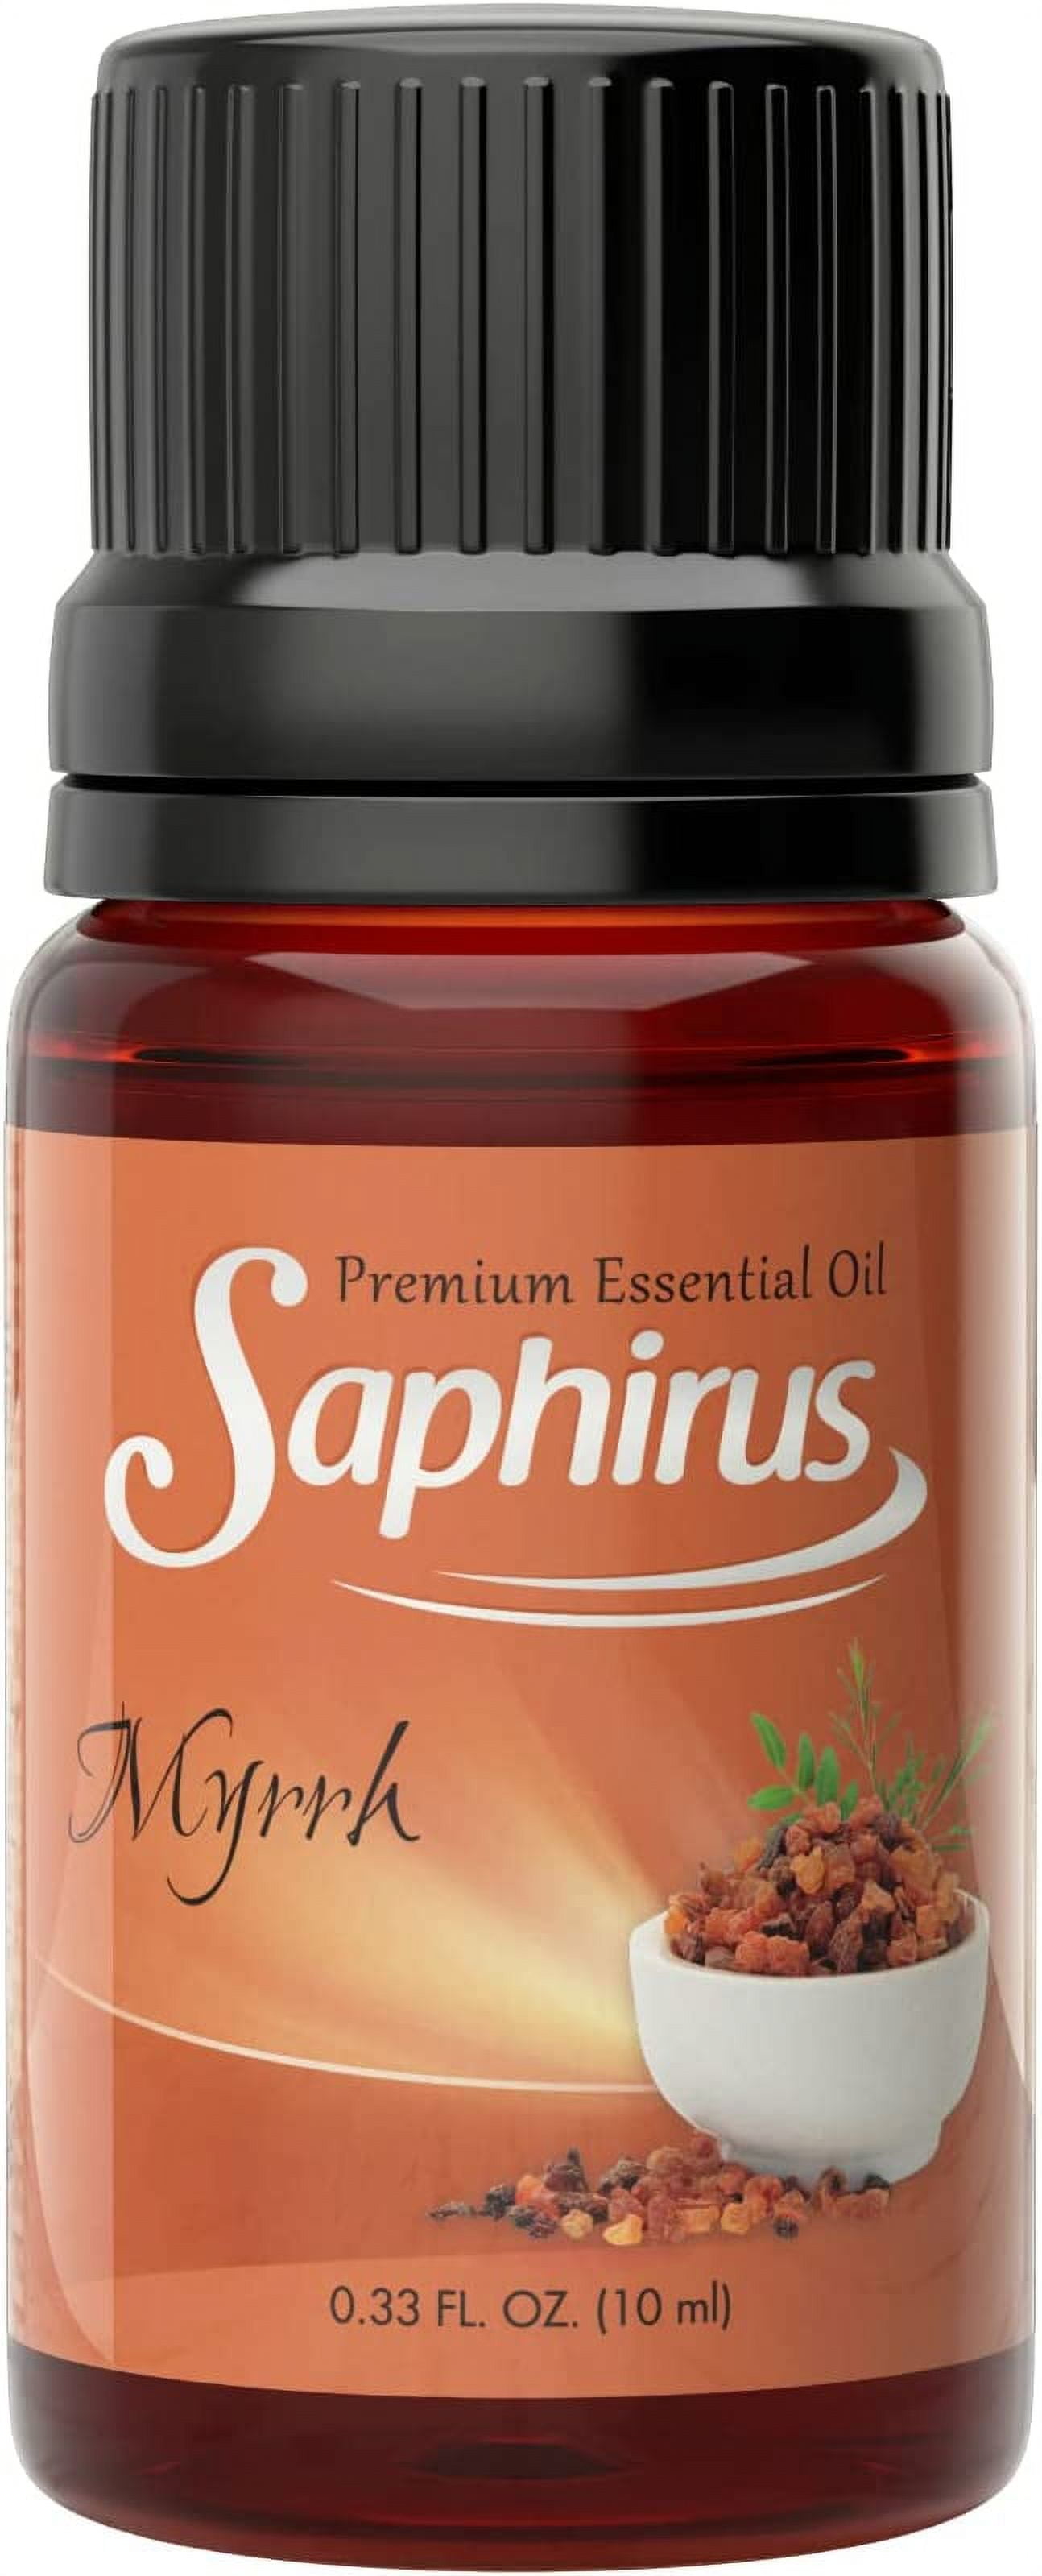 Saphirus Premium Essential Oil for Humidifier and Diffusers, Pure Oil to Enjoy A Refreshing Aromatherapy, Musk, 0.33 fl.oz